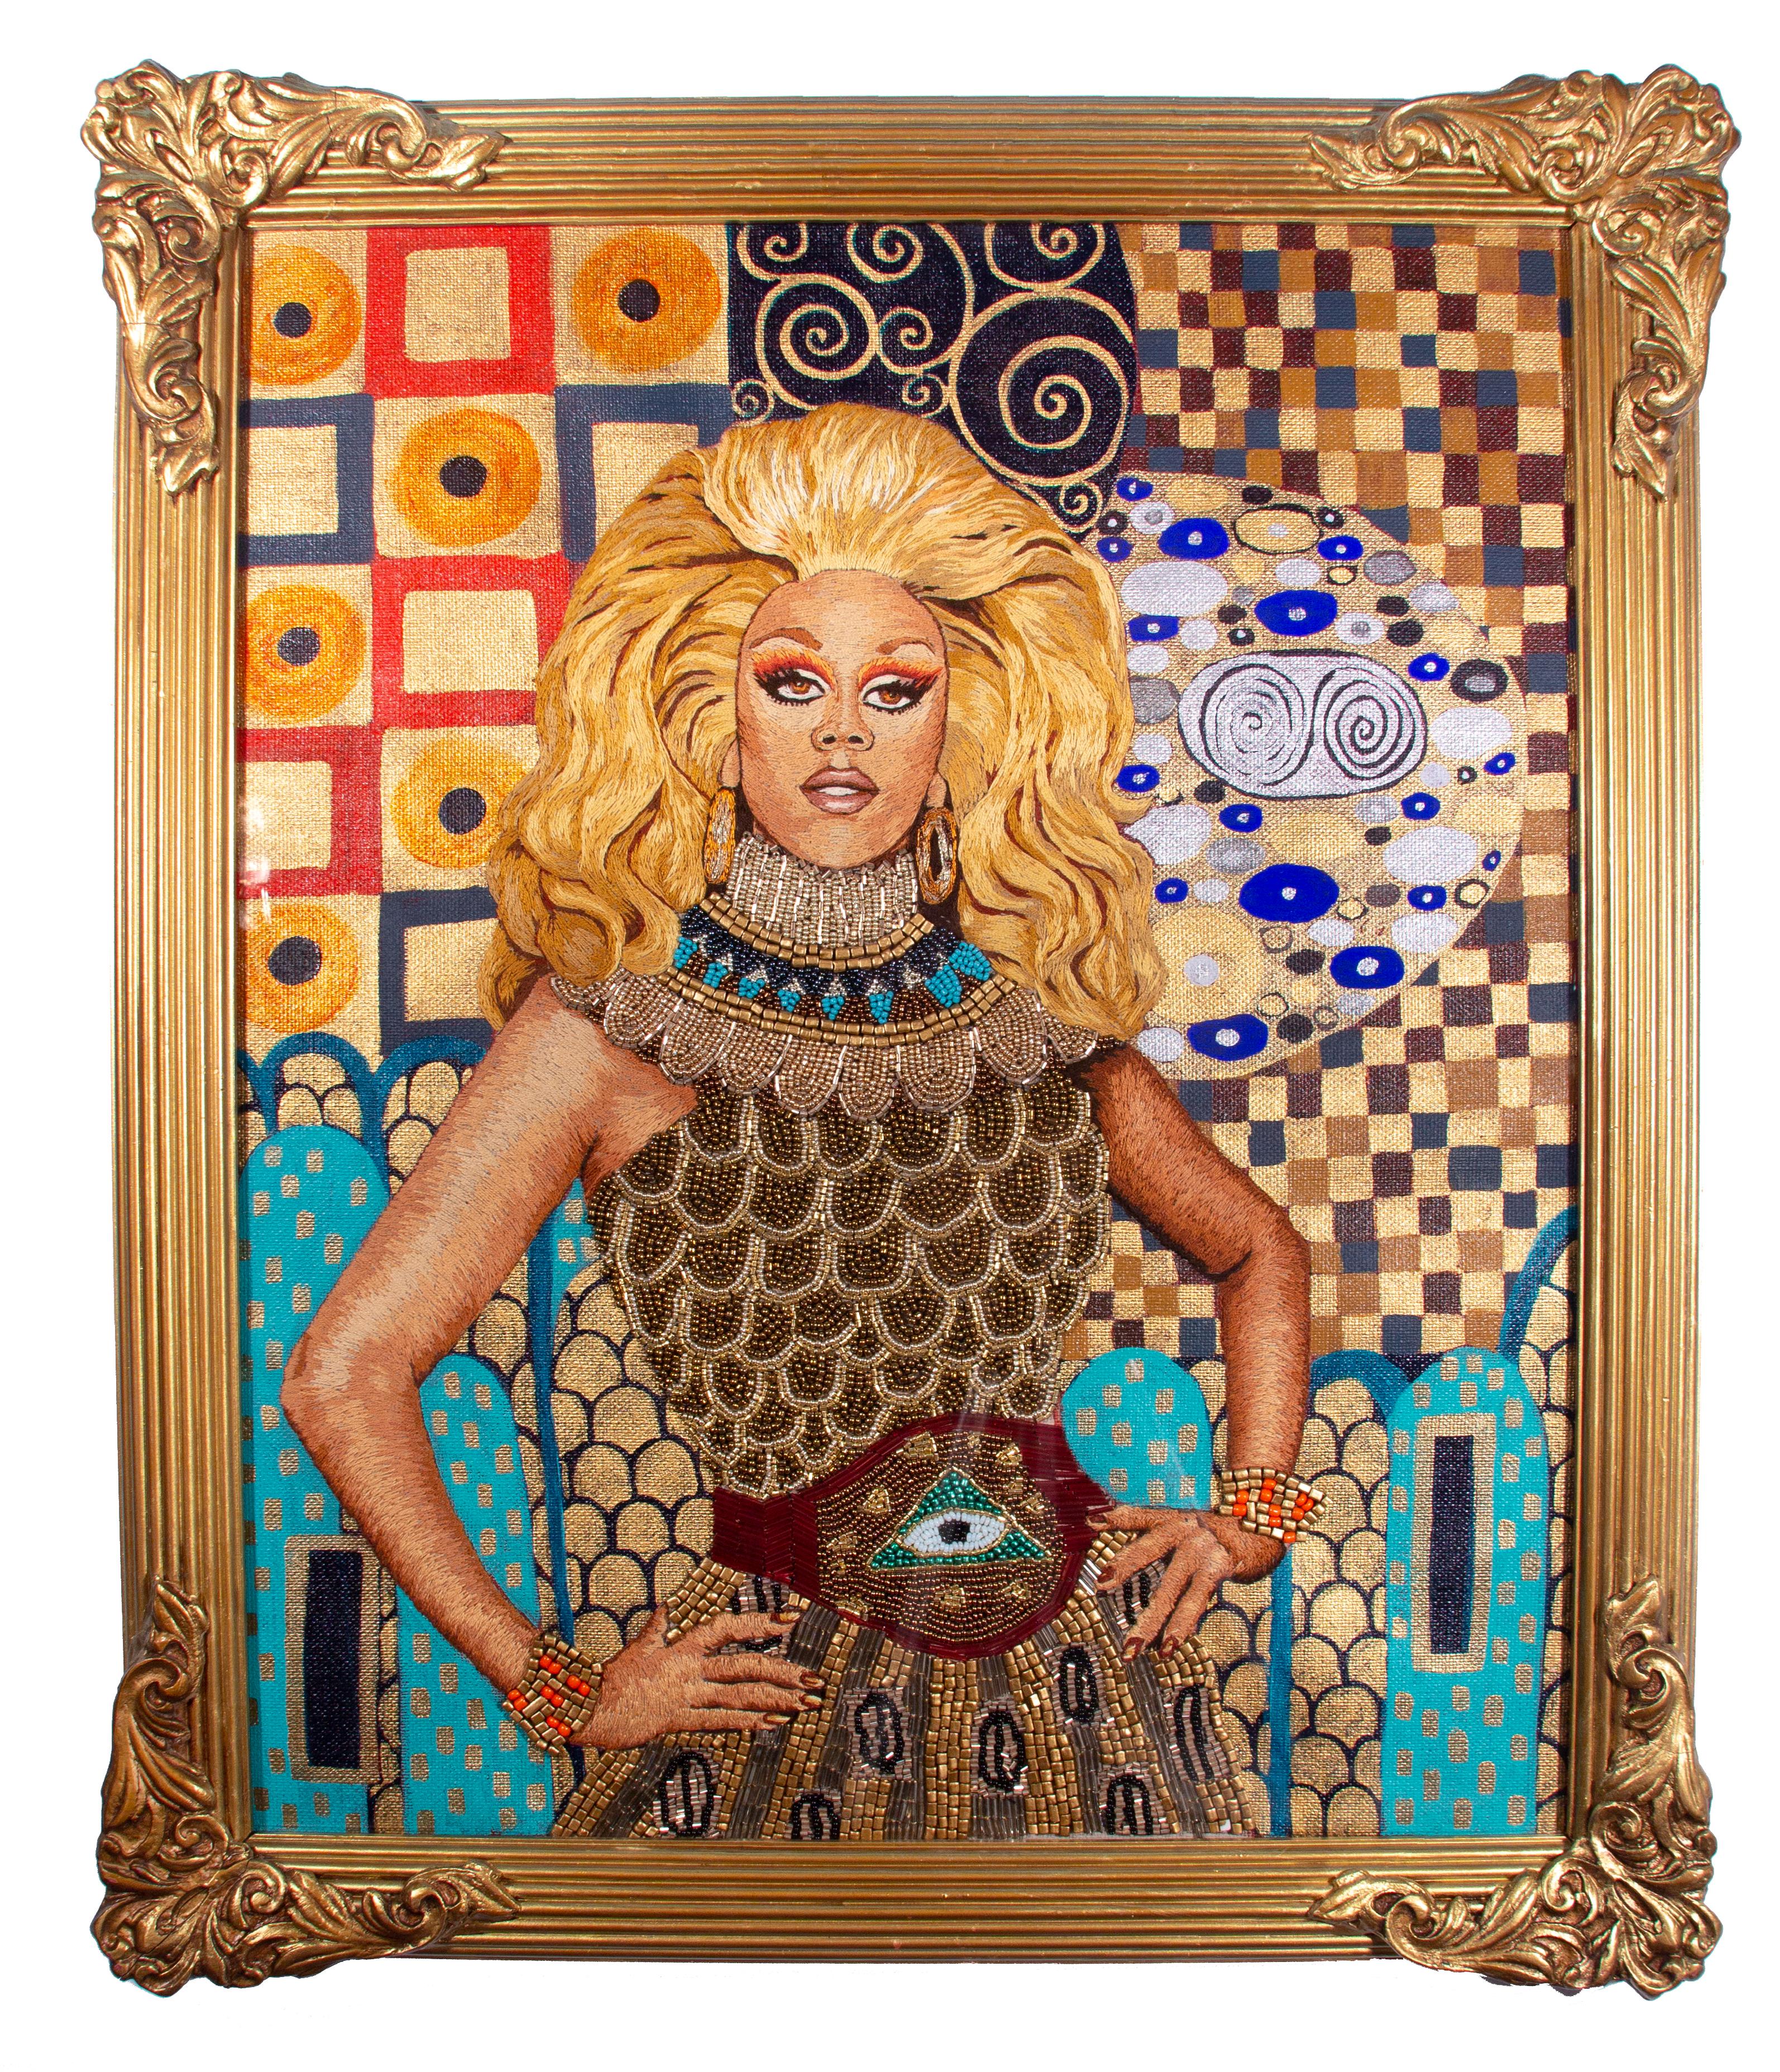 RuPaul in Gold, silk embroidery, beading and paint, framed - Mixed Media Art by Nicole O'Loughlin